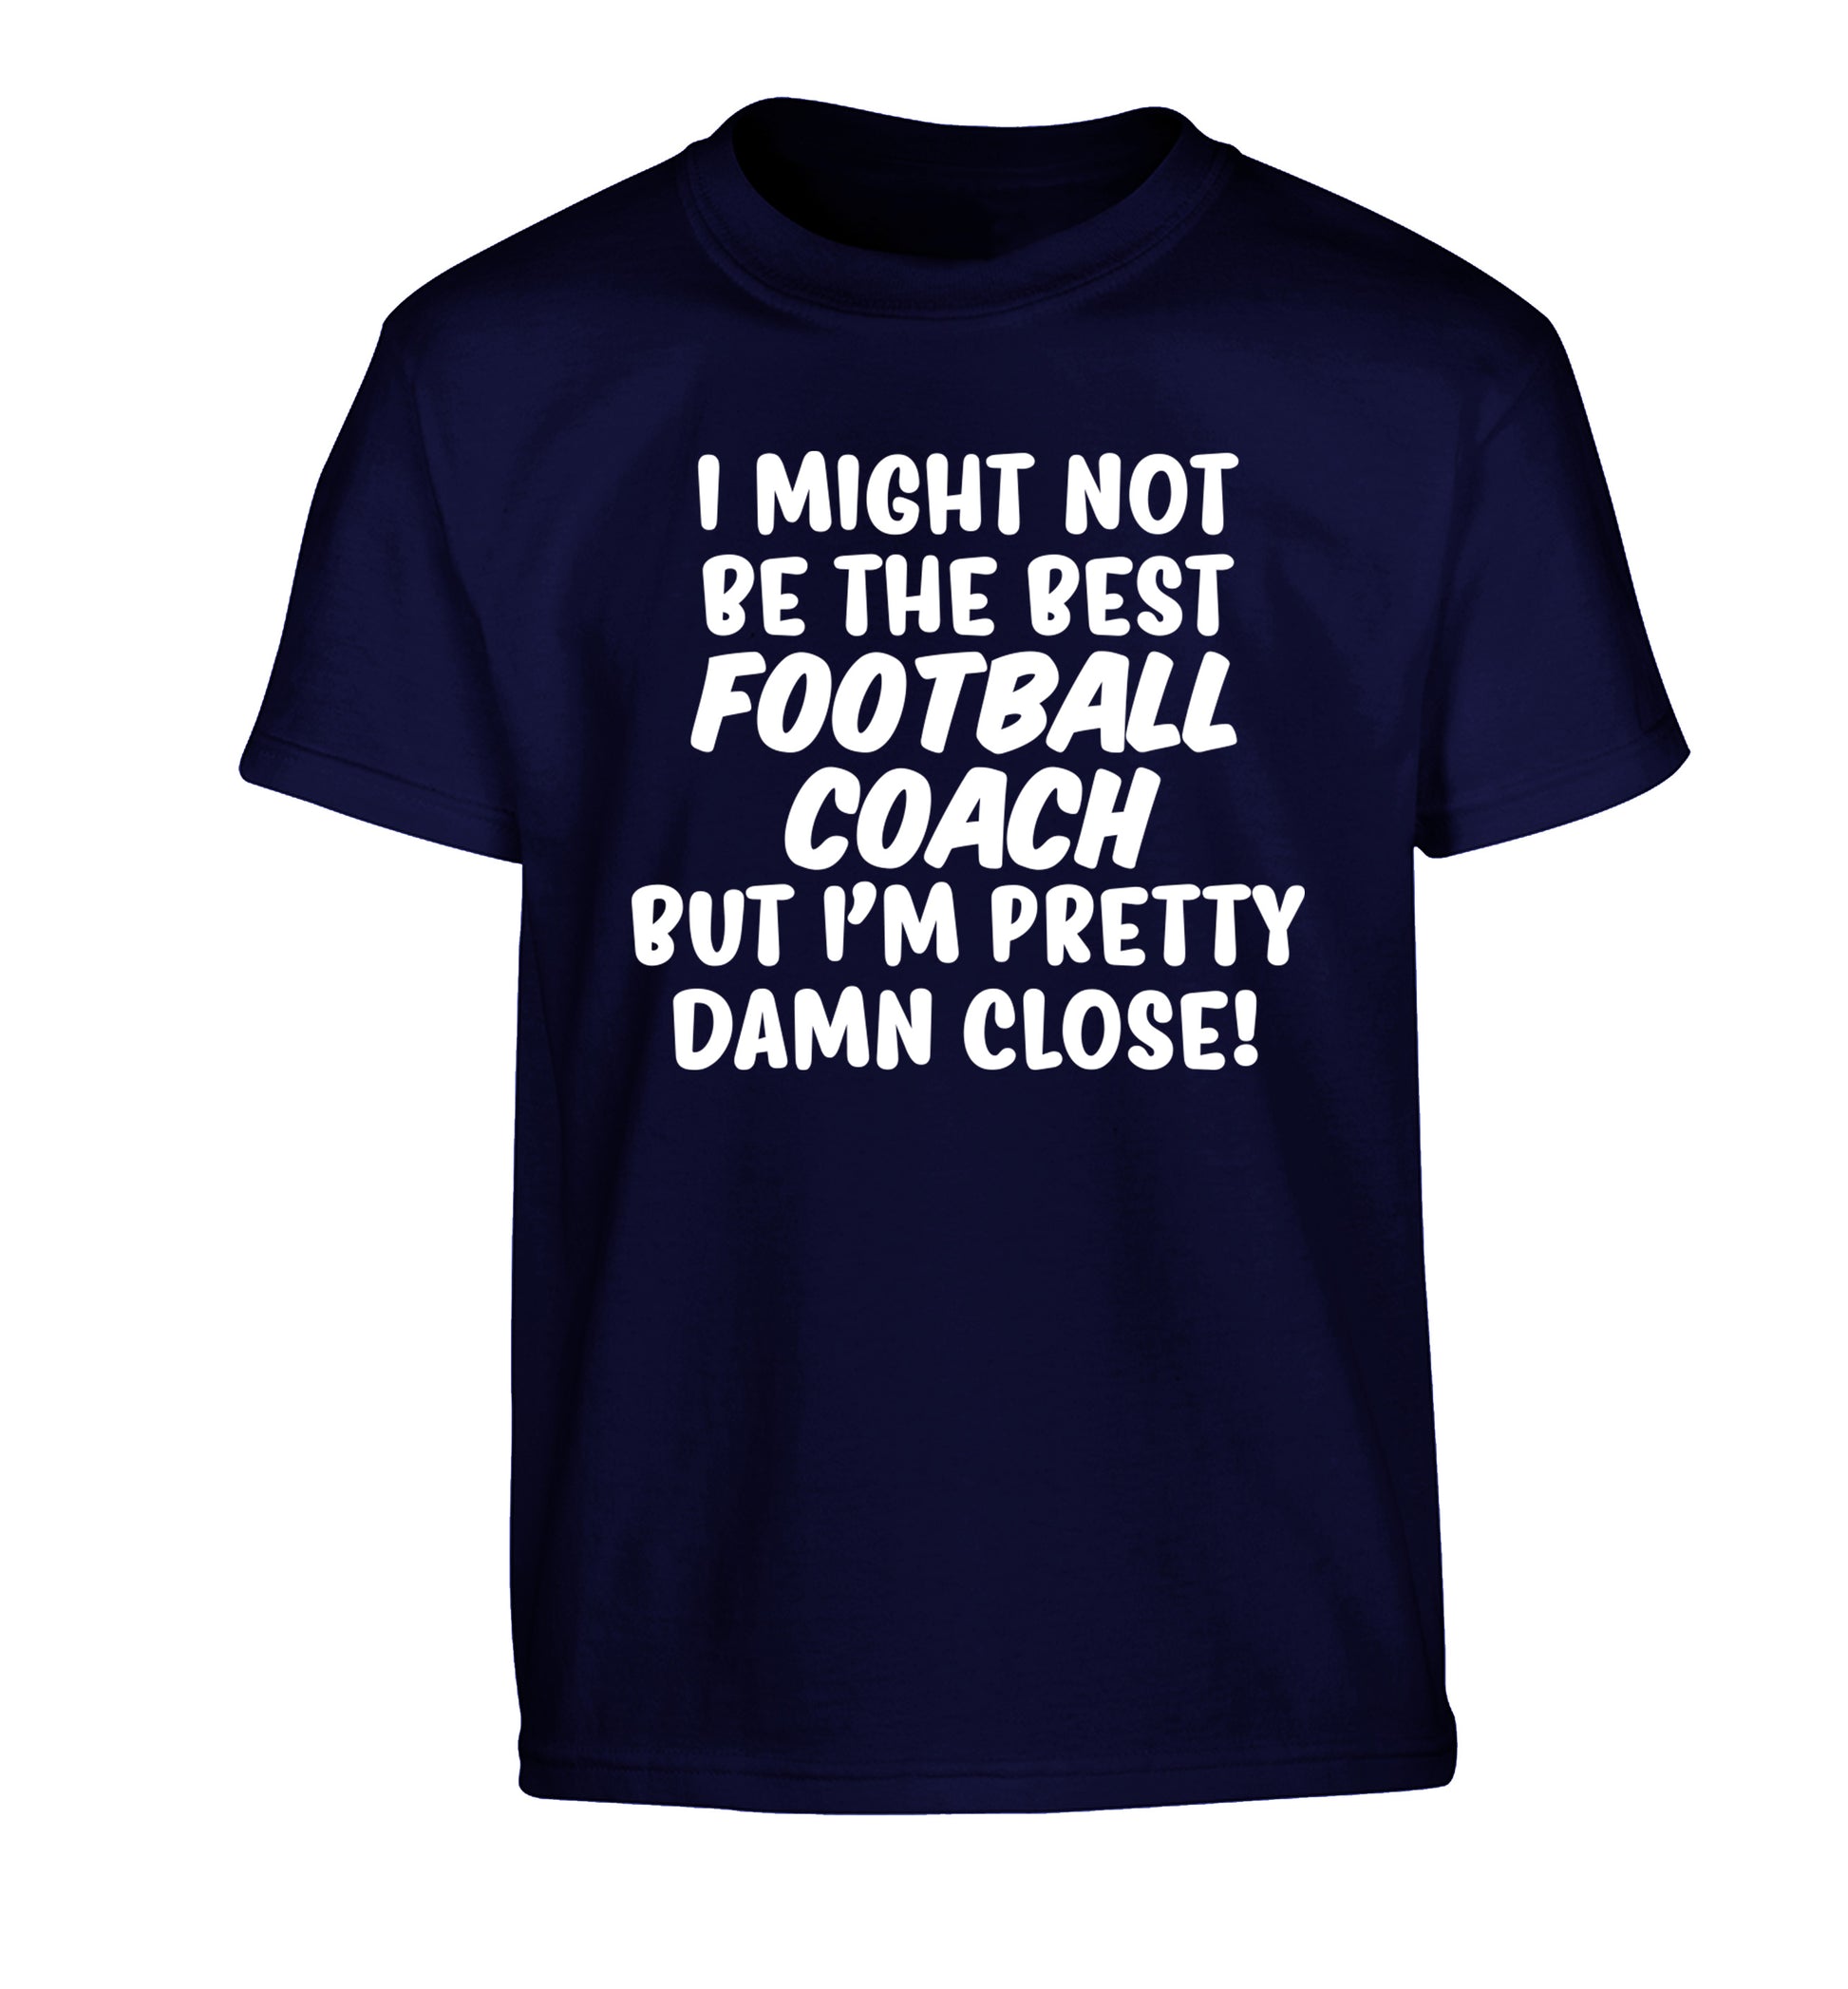 I might not be the best football coach but I'm pretty close! Children's navy Tshirt 12-14 Years